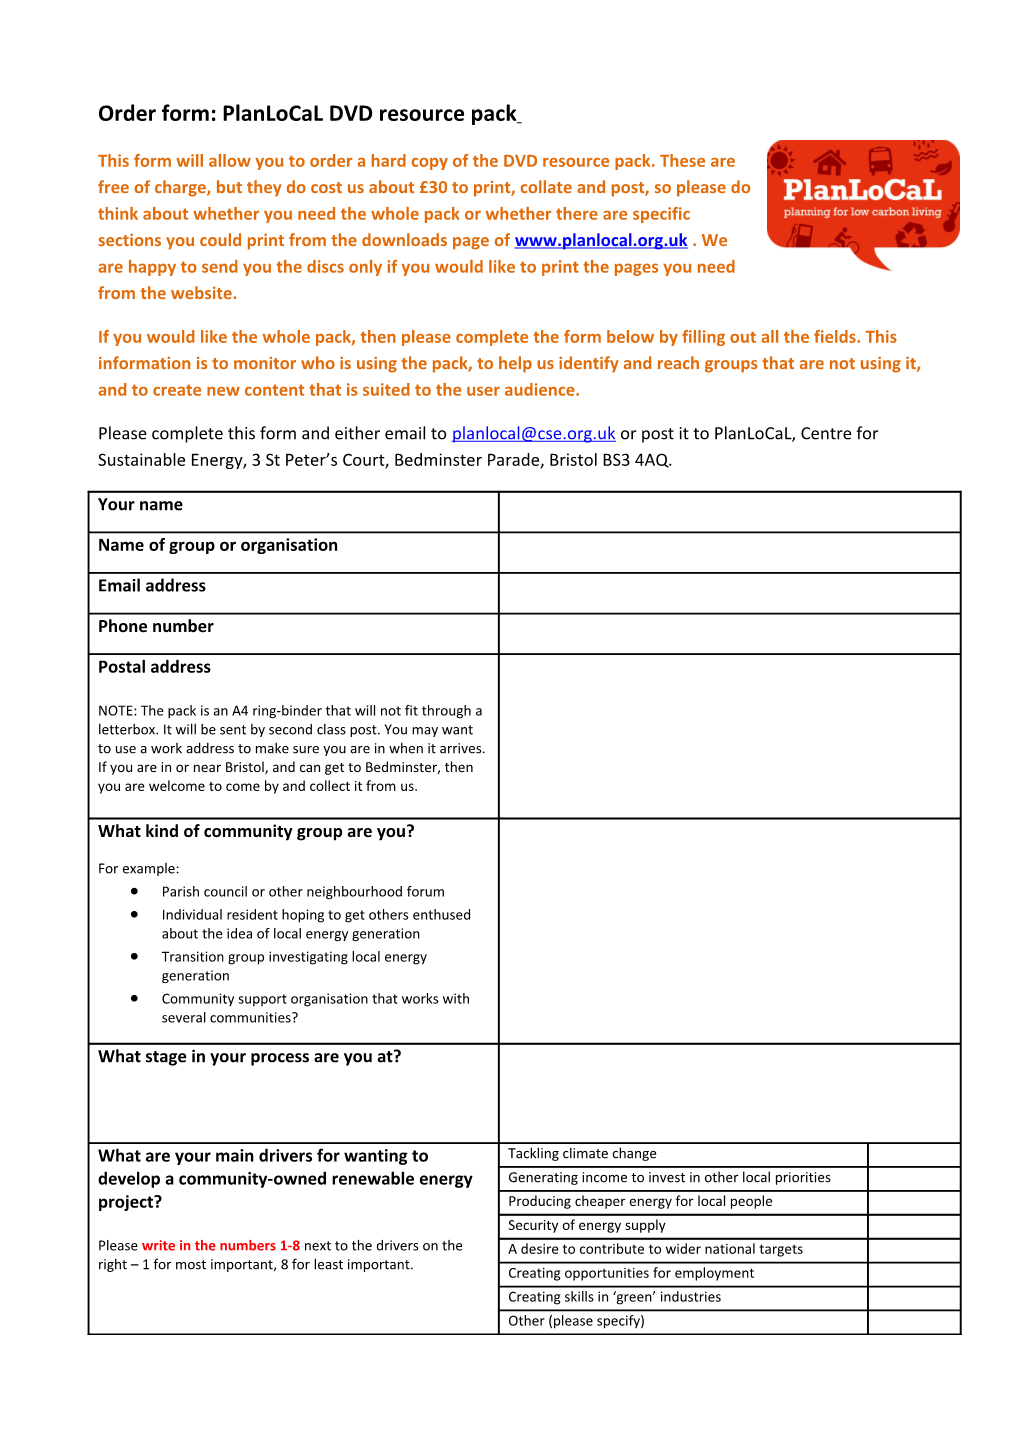 This Form Will Allow You to Order a Hard Copy of the DVD Resource Pack. These Are Free